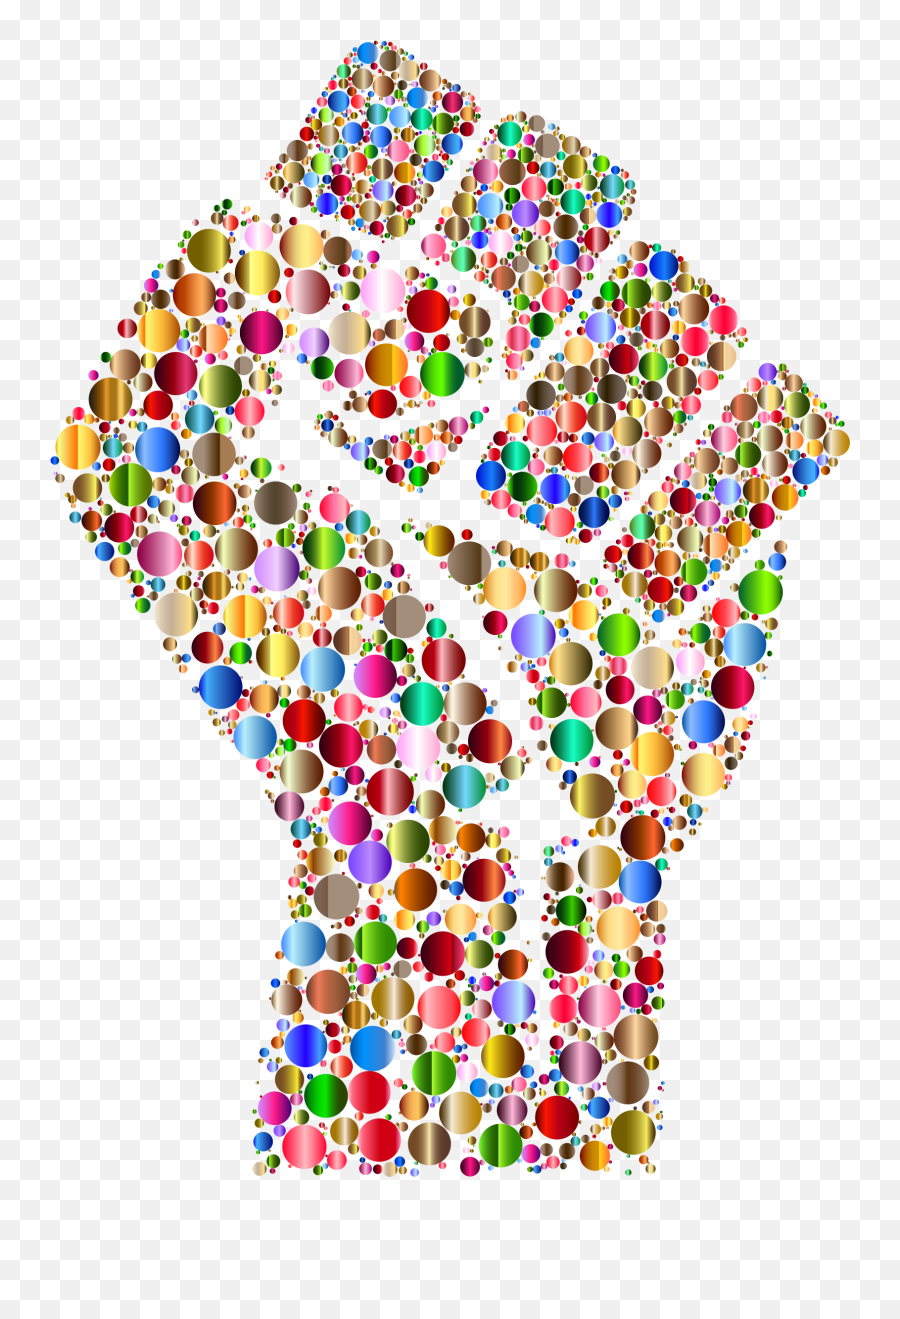 Big Image - Colorful Fist Full Size Png Download Seekpng Colorful Fists,Fist Png